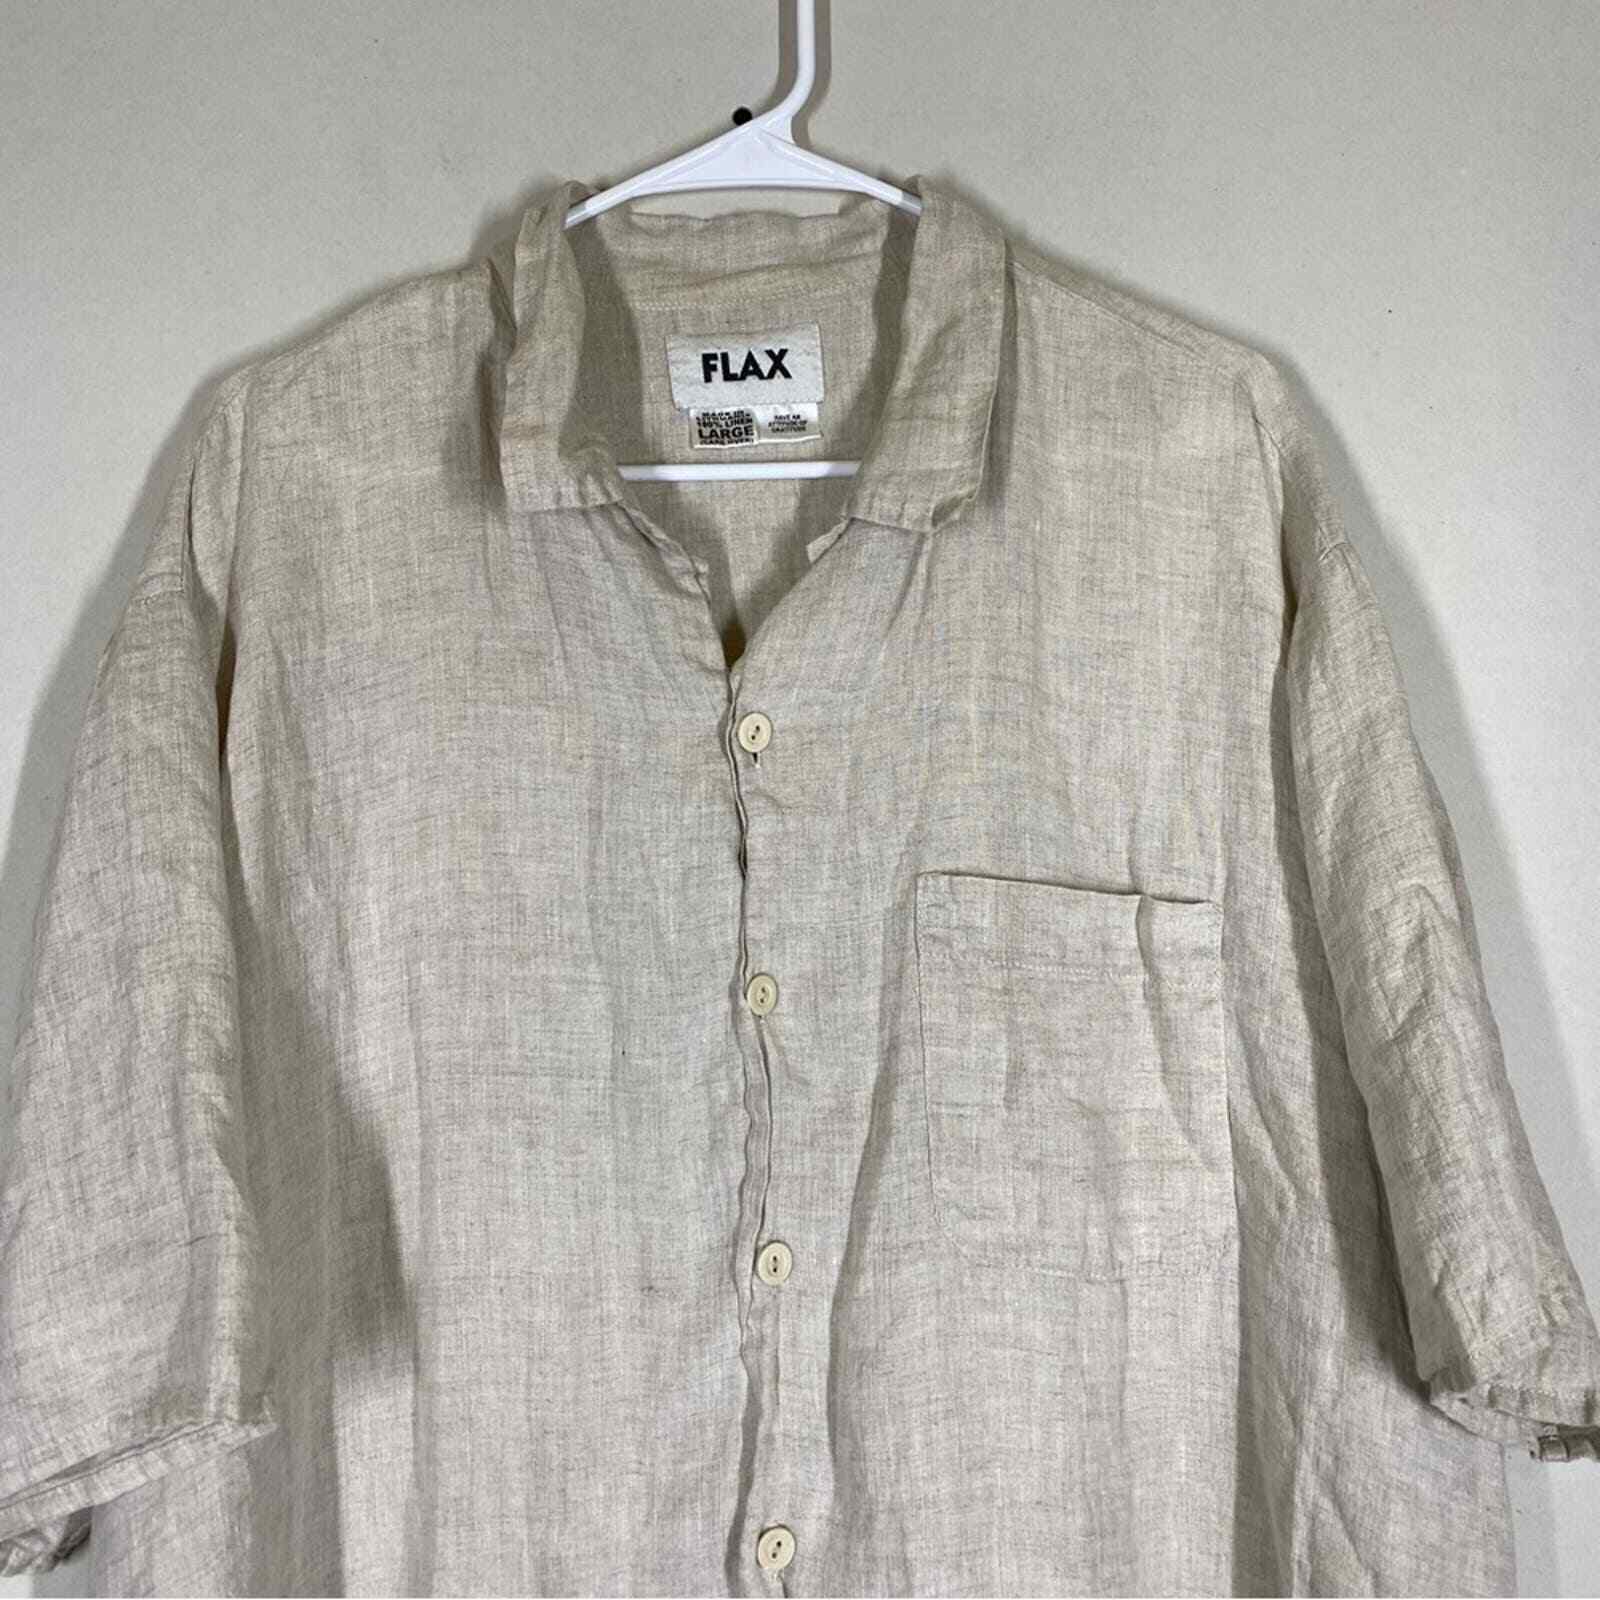 Flax 100% Linen Button Down Short Sleeve Top Size… - image 3